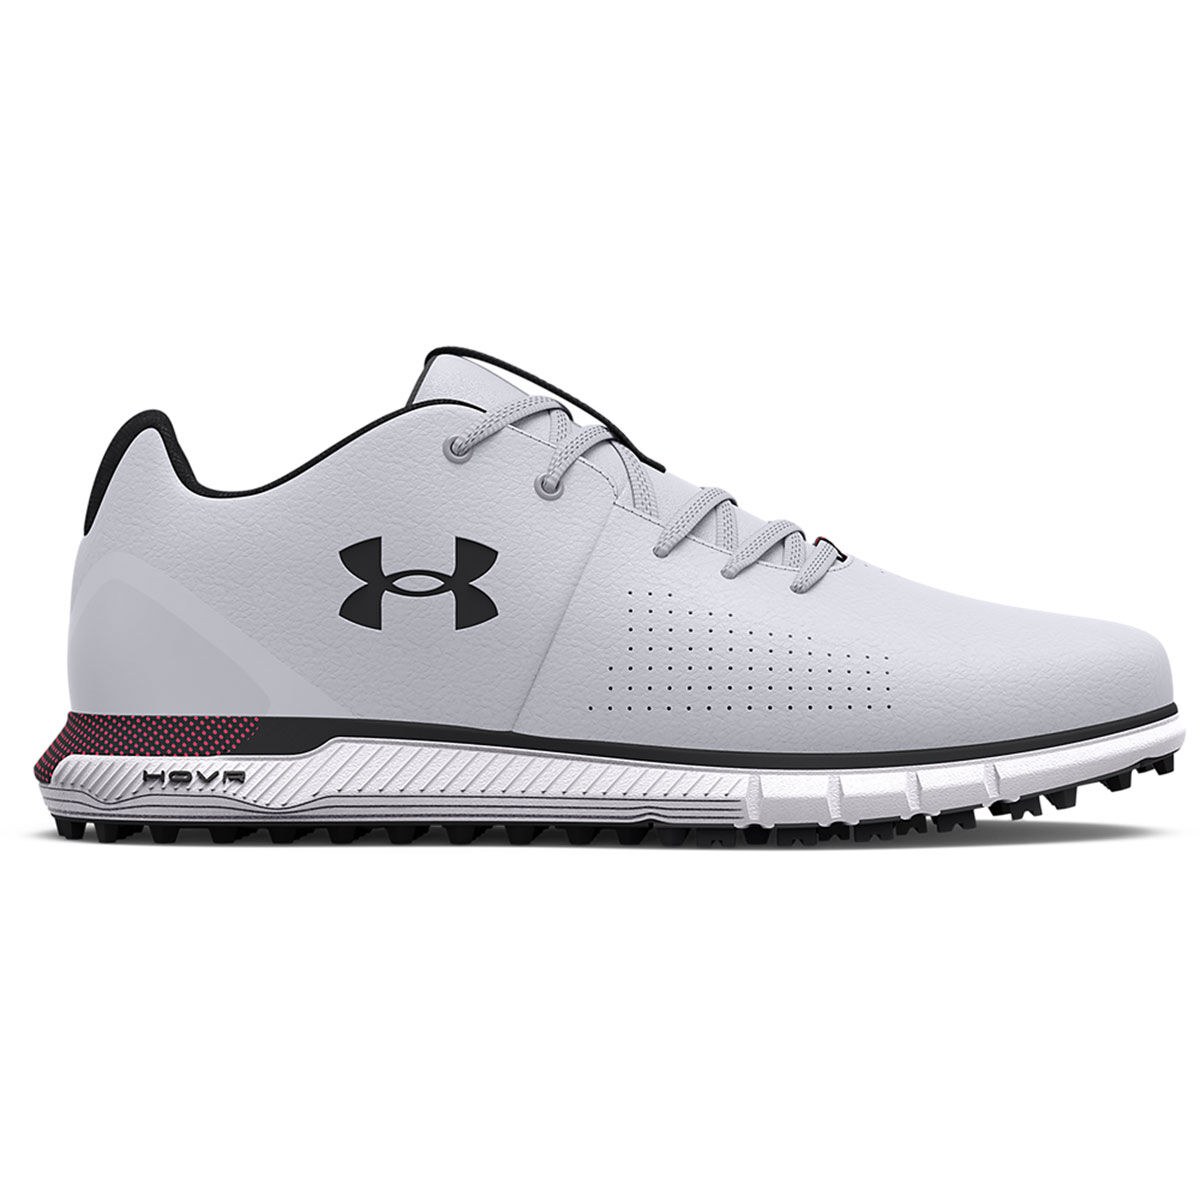 Under Armour Men’s HOVR Fade 2 Wide Spikeless Golf Shoes, Mens, Grey/black/black, 10.5 | American Golf